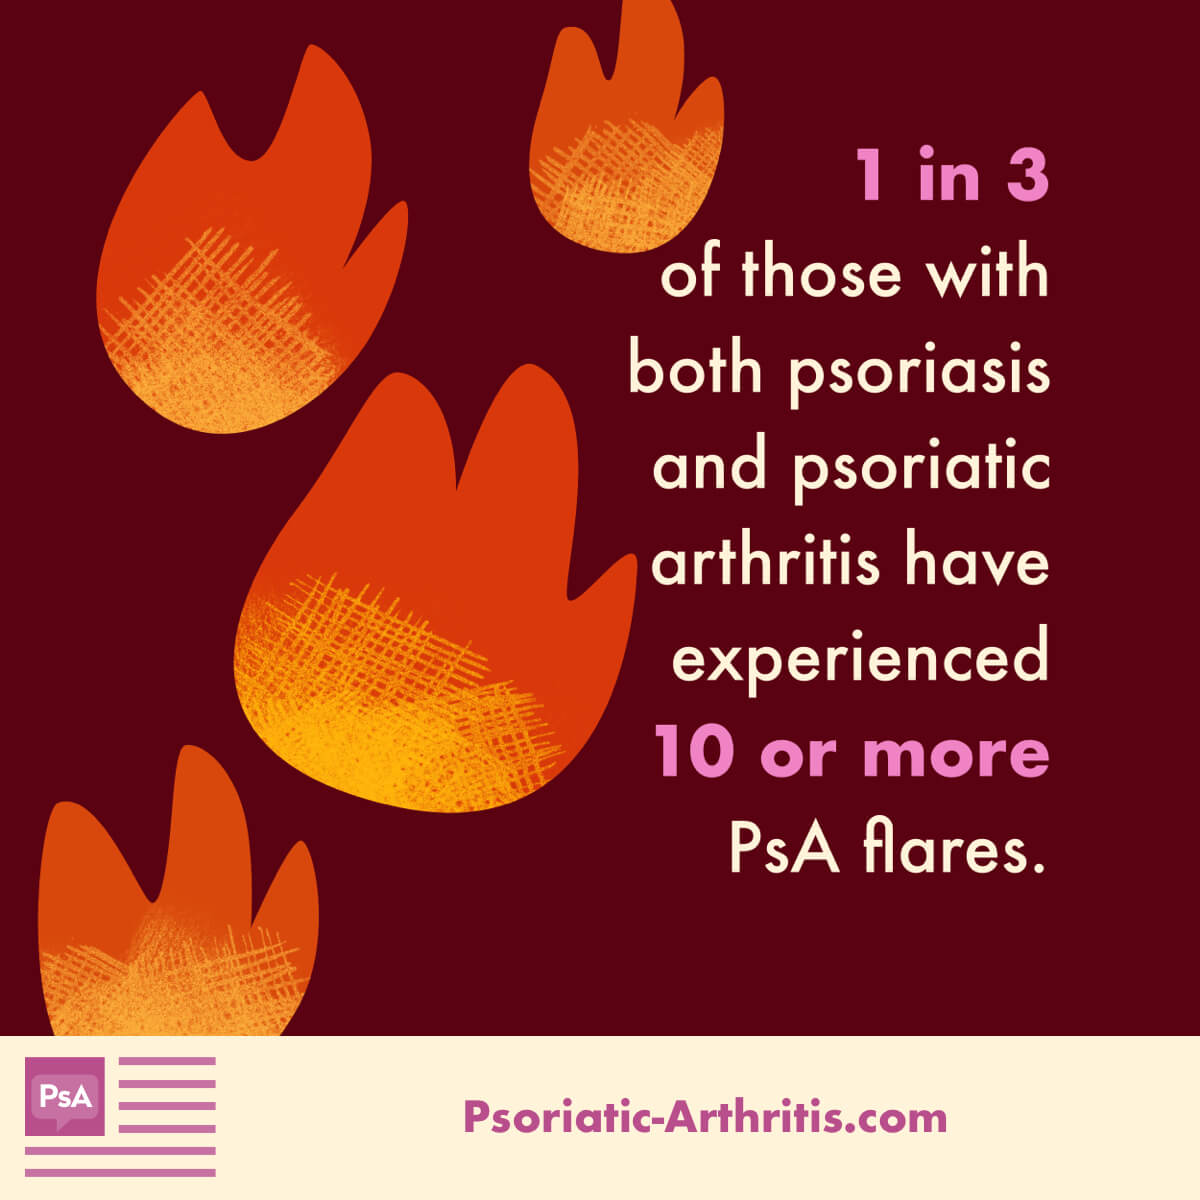 One in three of those with both psoriasis and psoriatic arthritis have experienced 10 or more PsA flares.